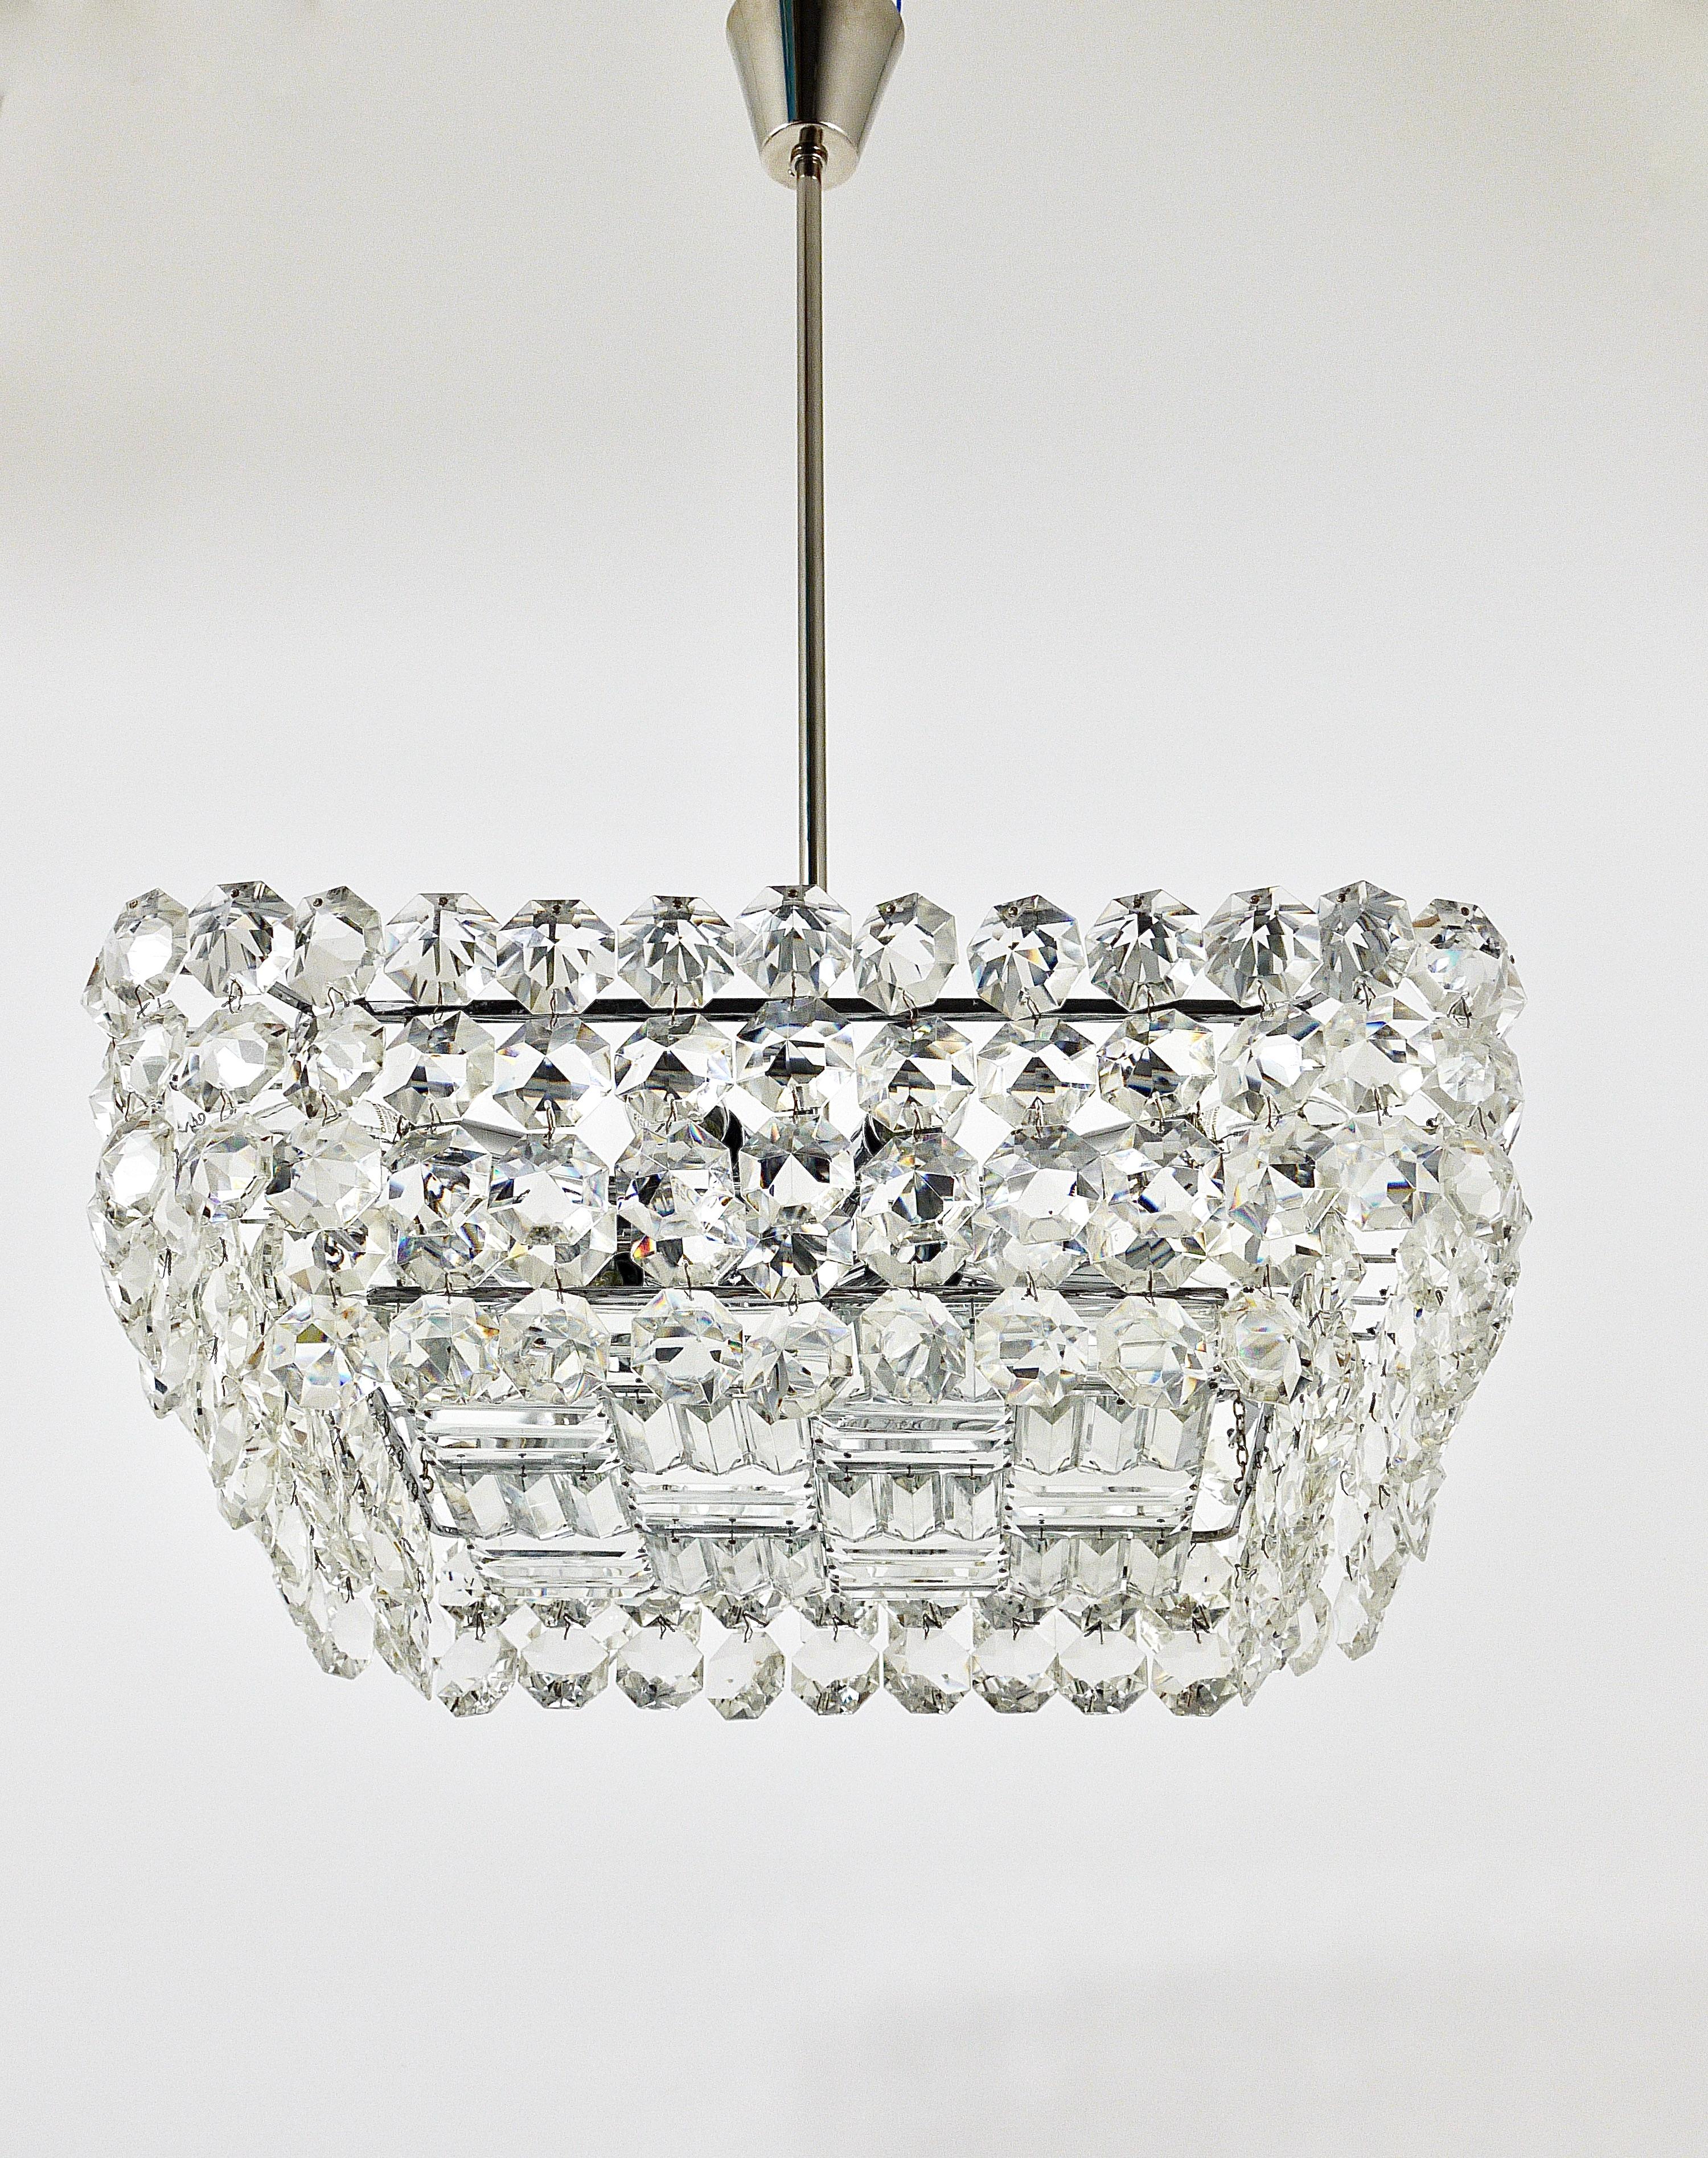 Large Square Bakalowits Chandelier with Diamond-Shaped Crystals, Austria, 1950s In Good Condition For Sale In Vienna, AT